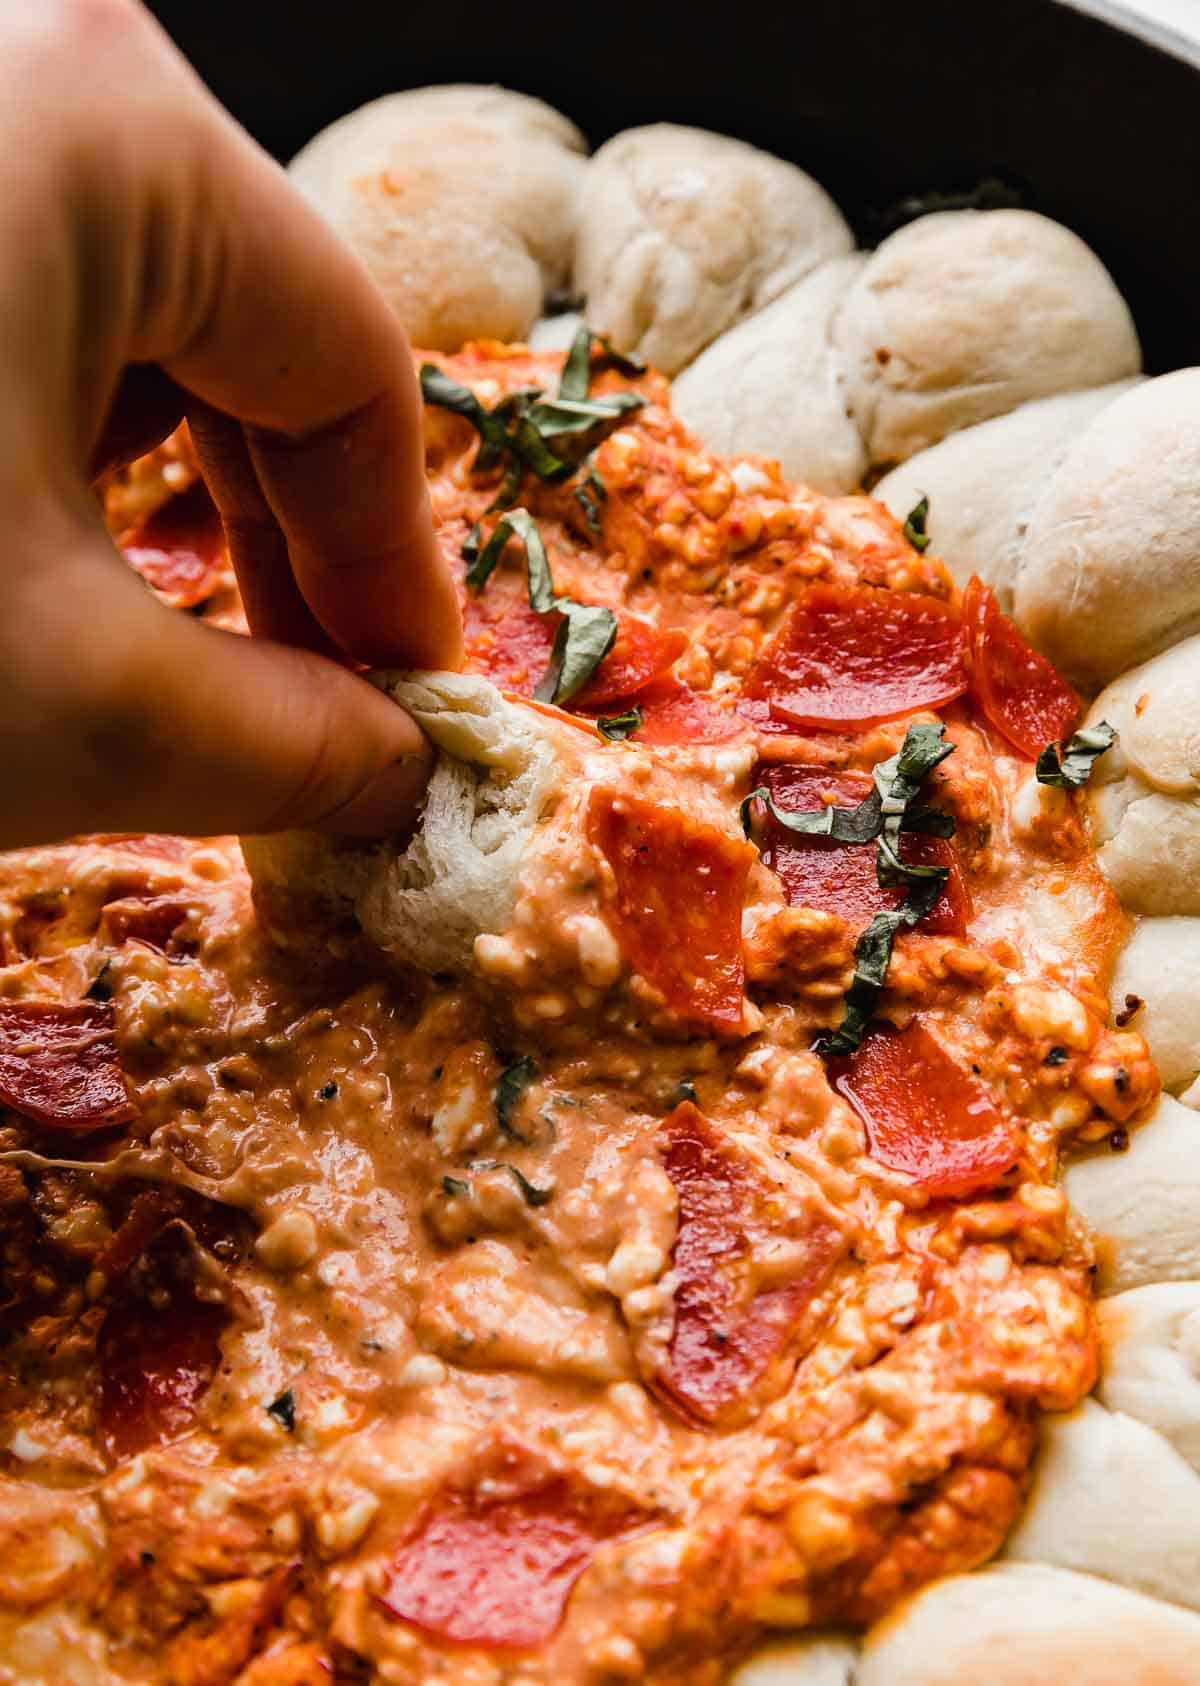 A pizza roll being dipped into a cream cheese pizza dip.